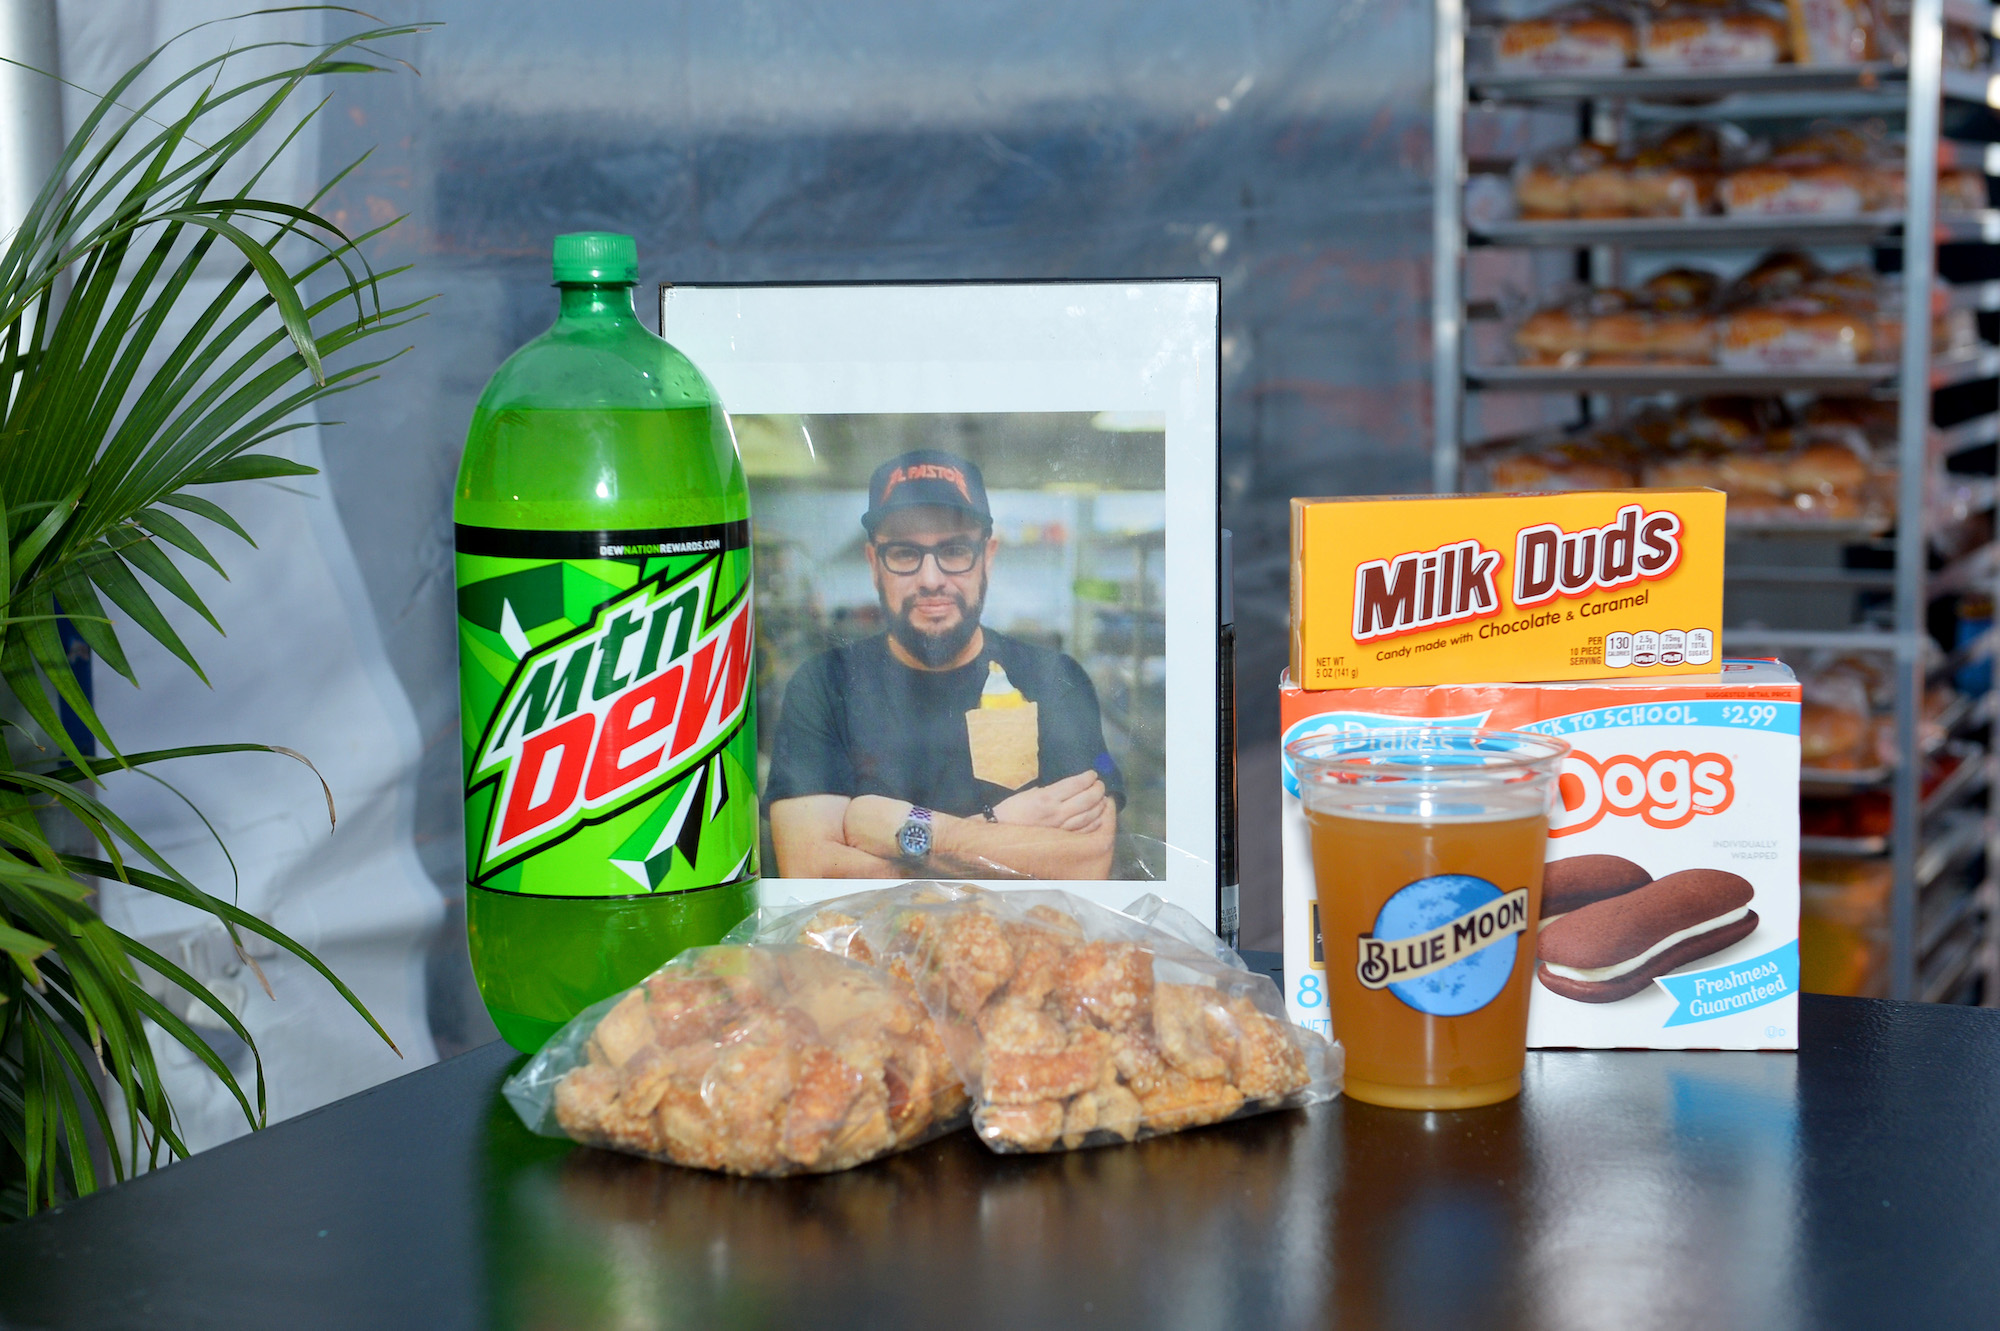 A memorial for Chef Carl Ruiz featuring a framed photo of him surrounded by a bottle of Mountain Dew, a cup of beer, a box of Milk Duds and a box of Devil Dogs